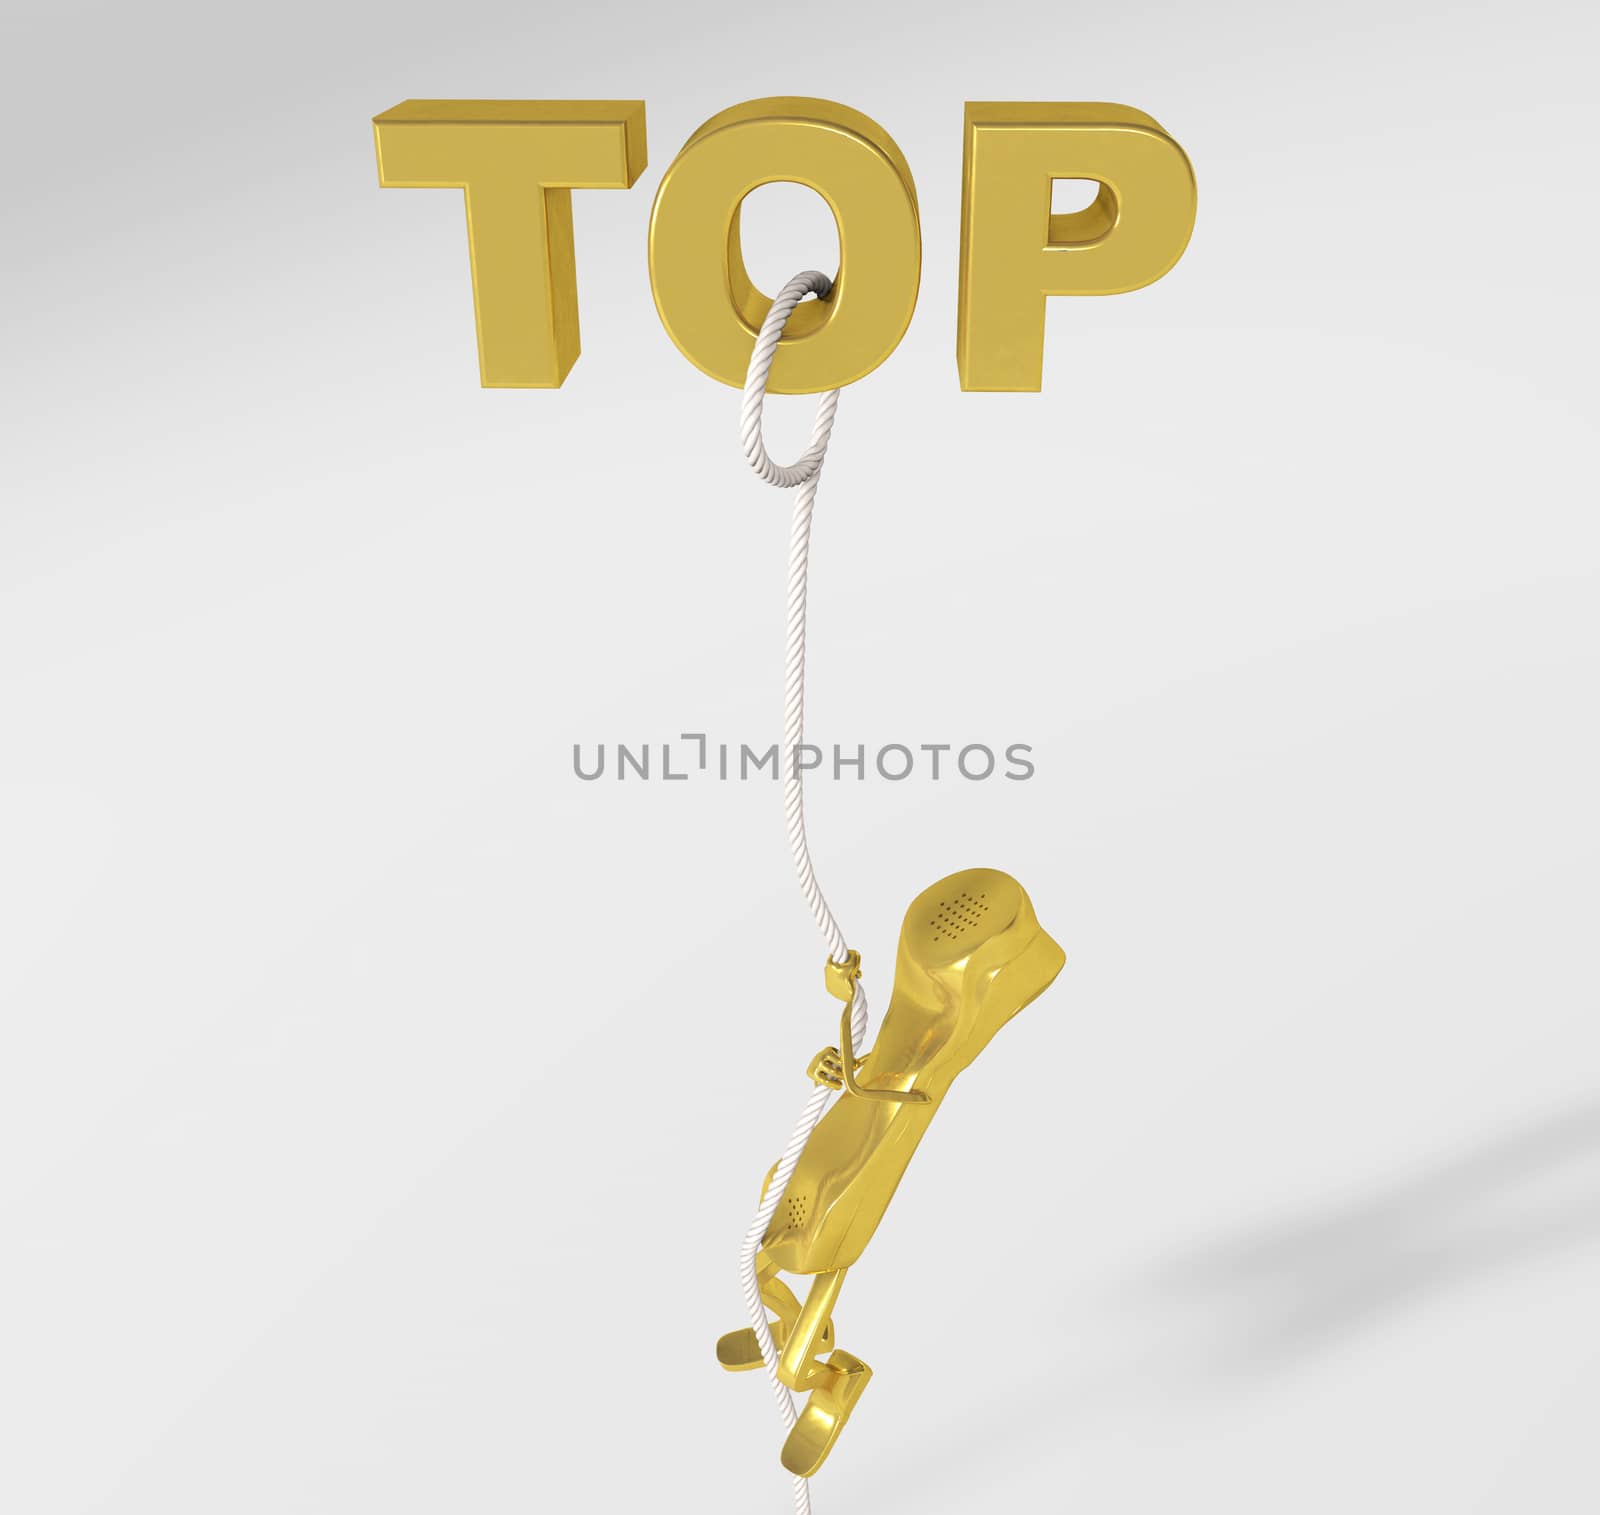 3d rendering of a telephone character climbing on a rope to the top isolated on white